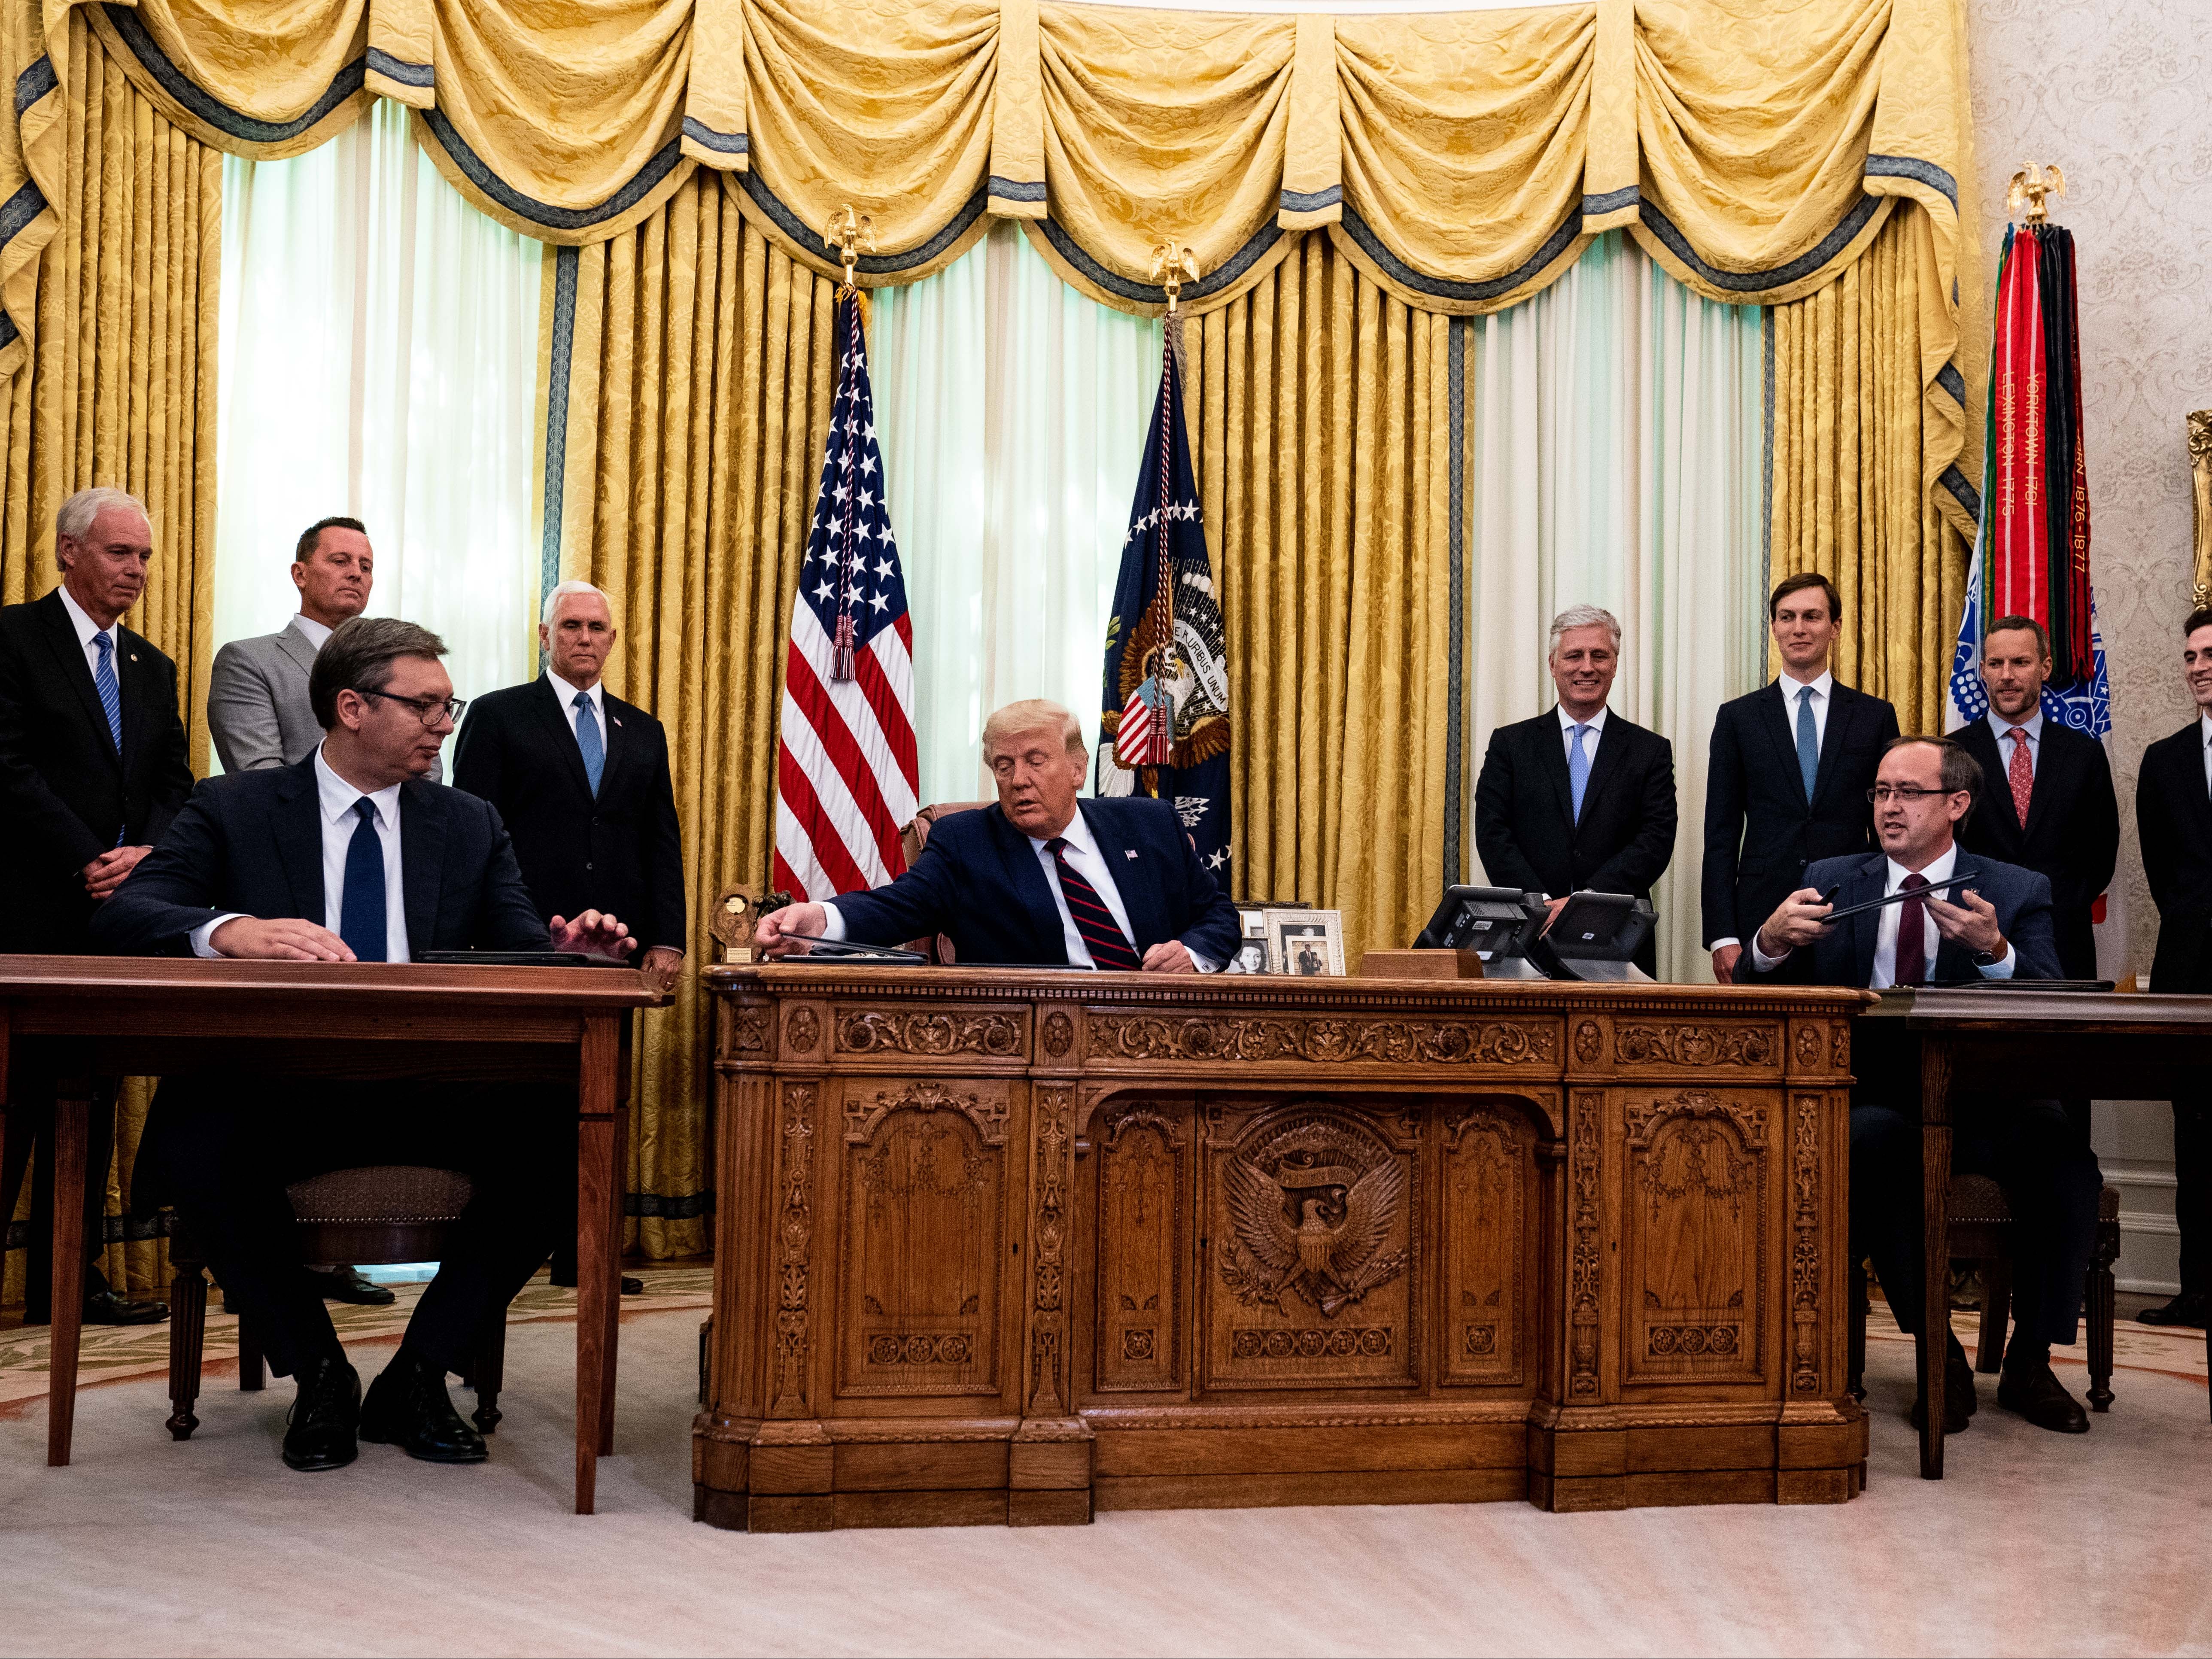 Donald Trump (centre) participates in a signing ceremony and meeting with Serbian president Aleksandar Vucic (left) and Kosovo prime minister Avdullah Hoti (right)